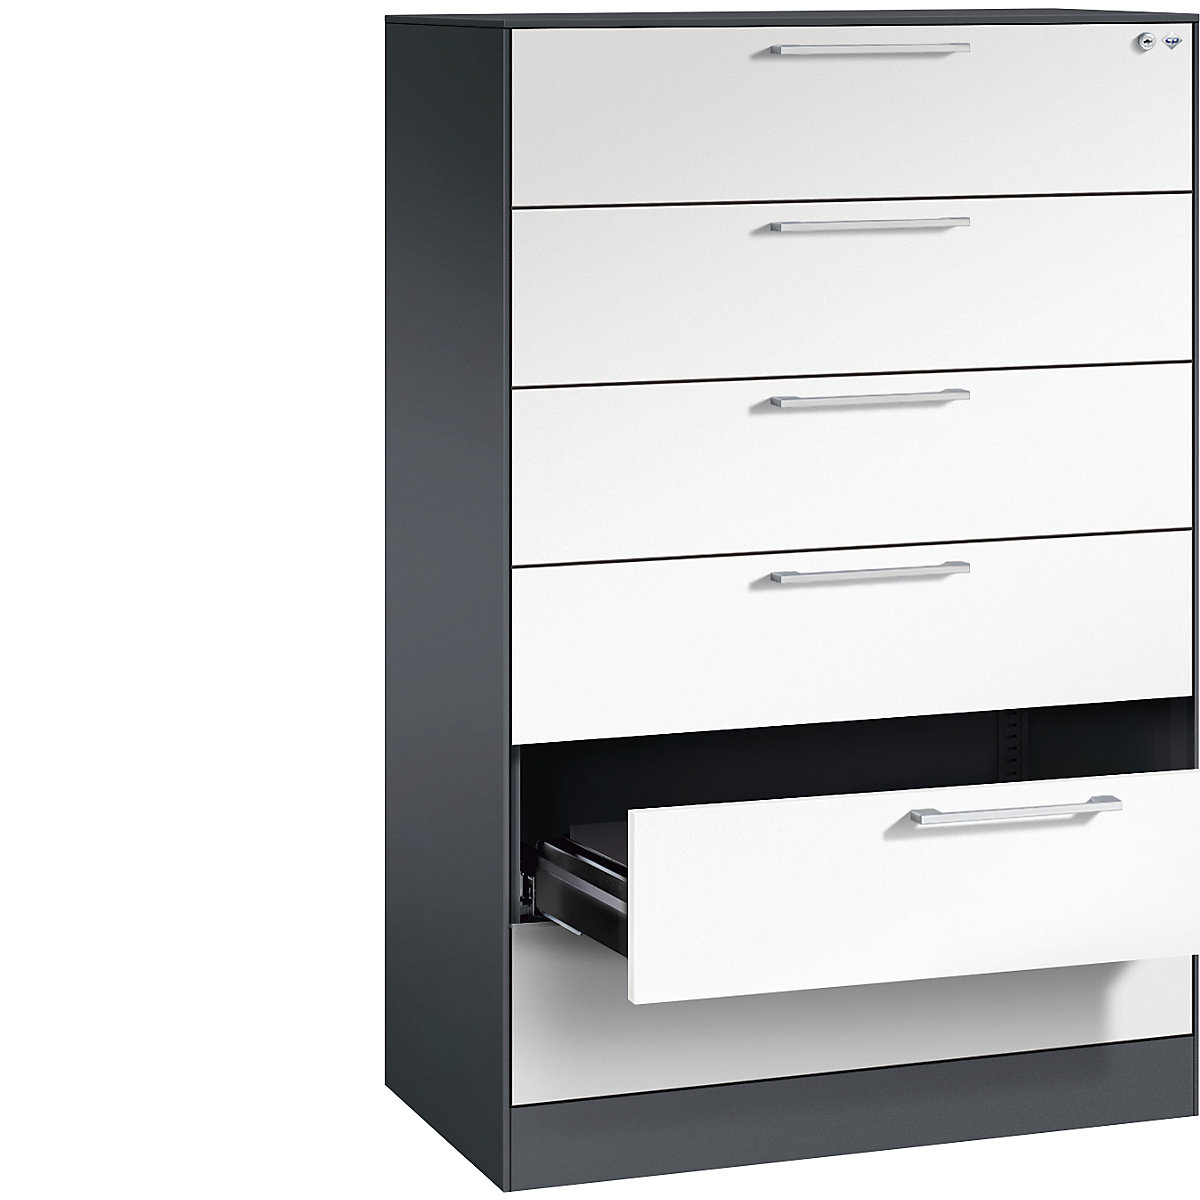 ASISTO card file cabinet – C+P, height 1292 mm, with 6 drawers, A5 landscape, black grey/white-16